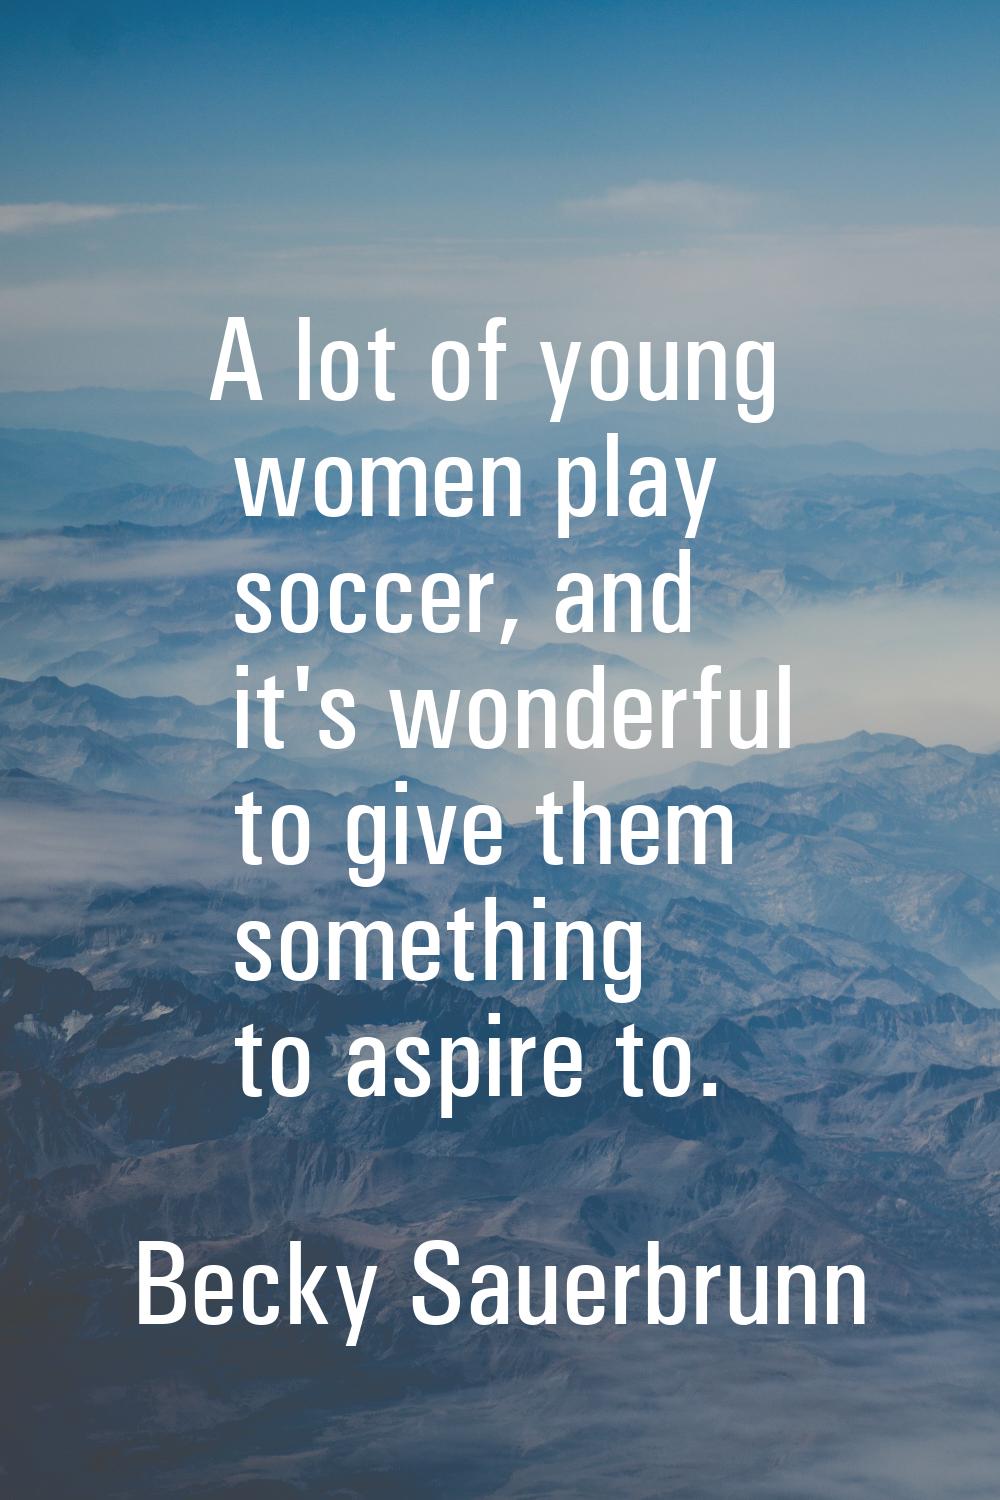 A lot of young women play soccer, and it's wonderful to give them something to aspire to.